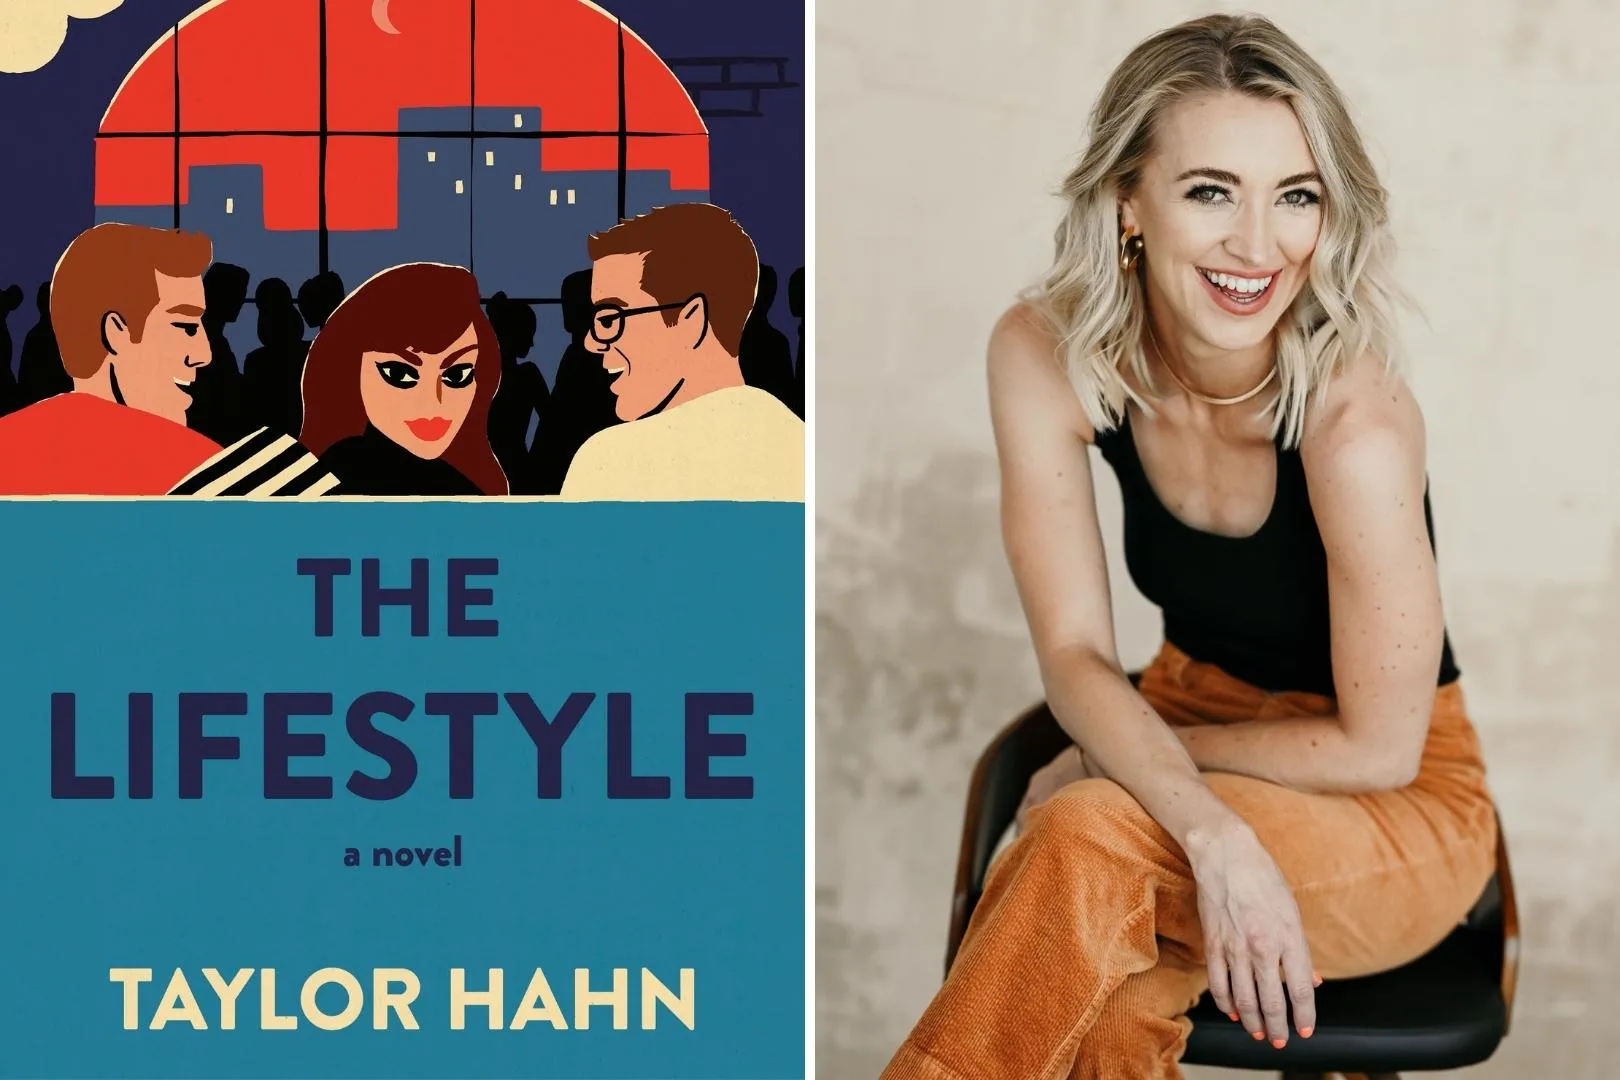 QandA with Taylor Hahn, Author of The Lifestyle